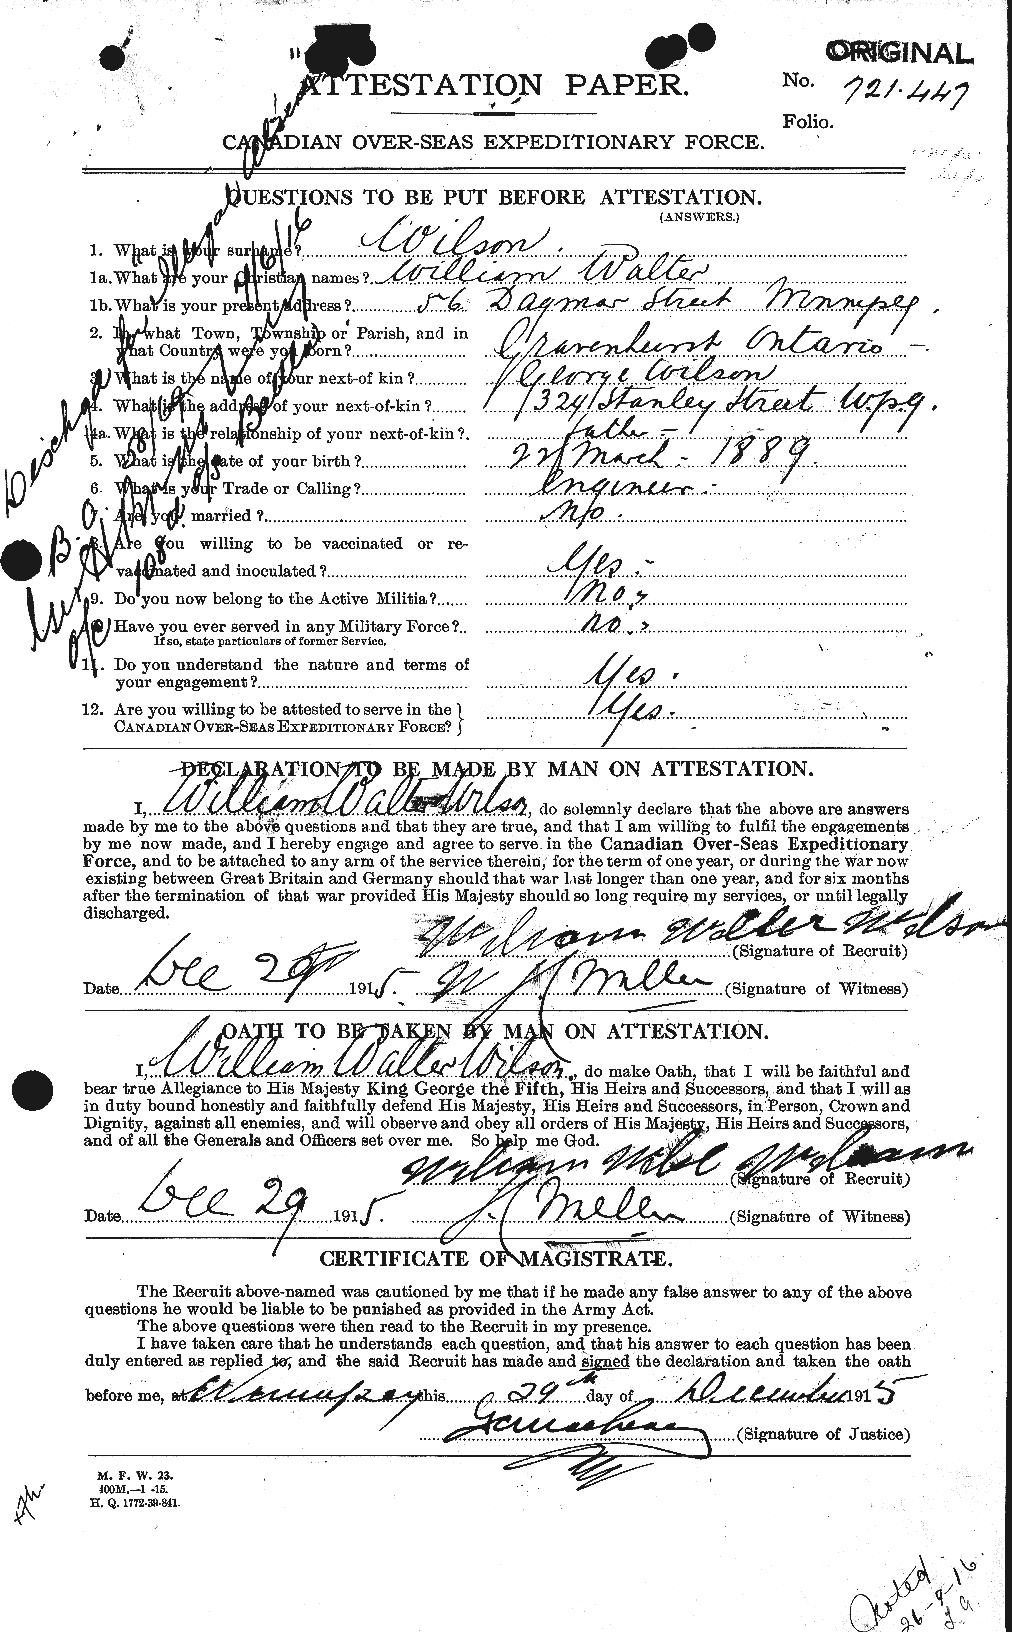 Personnel Records of the First World War - CEF 684117a